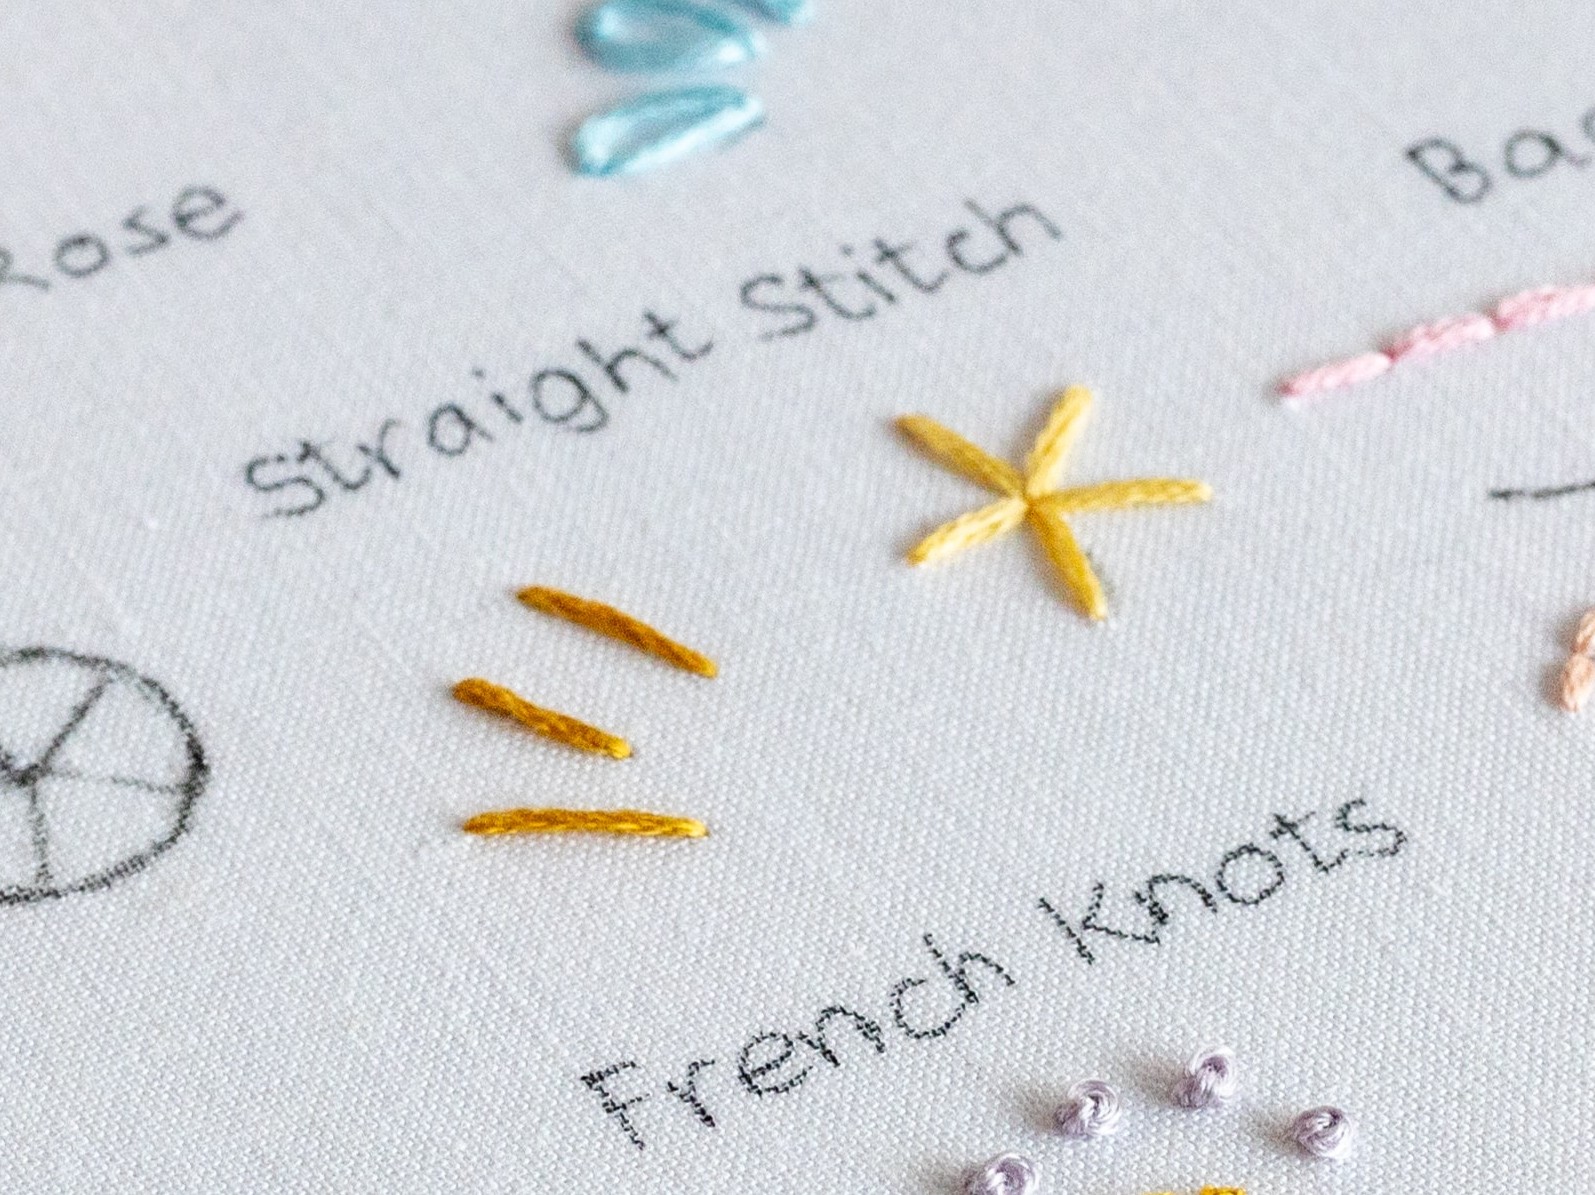 This image shows straight stitch stitched on fabric.